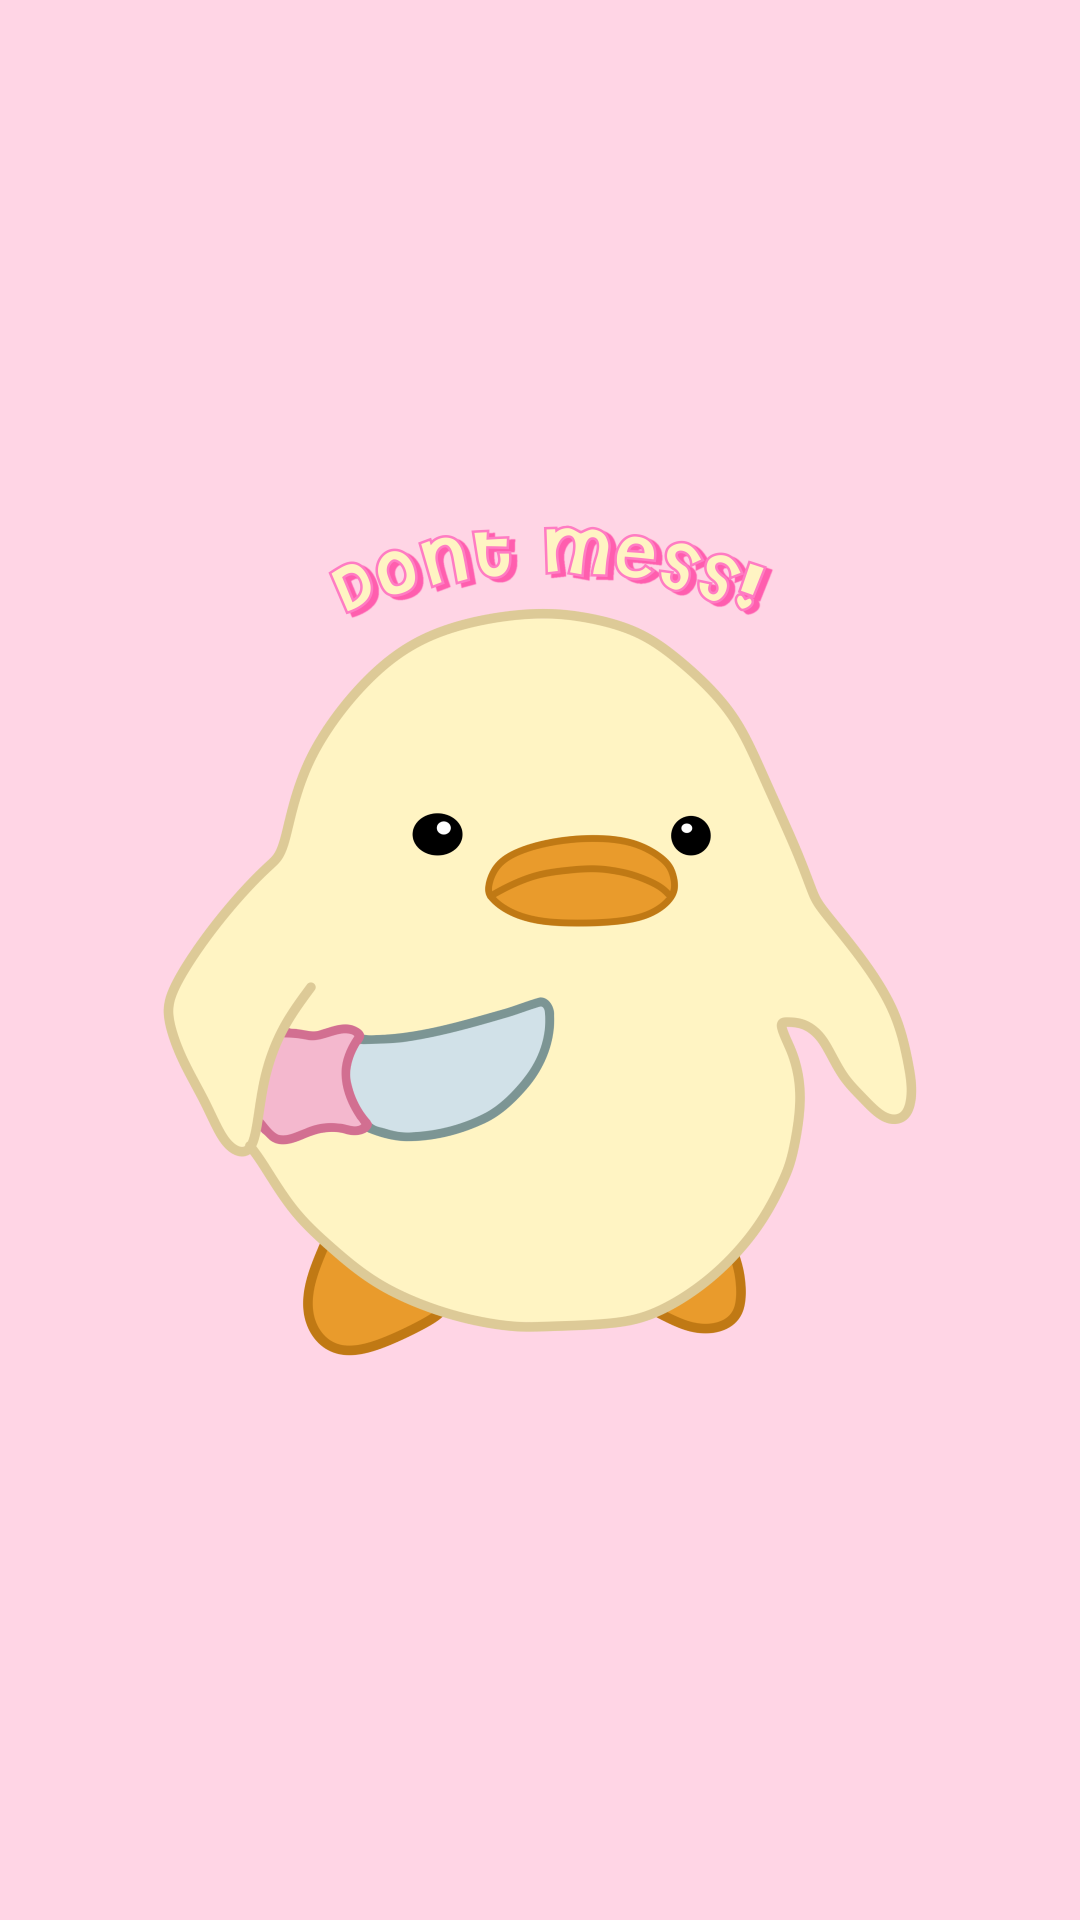 Duck with Knife Mess! Wallpaper. iPhone wallpaper kawaii, Wallpaper iphone cute, Funny phone wallpaper